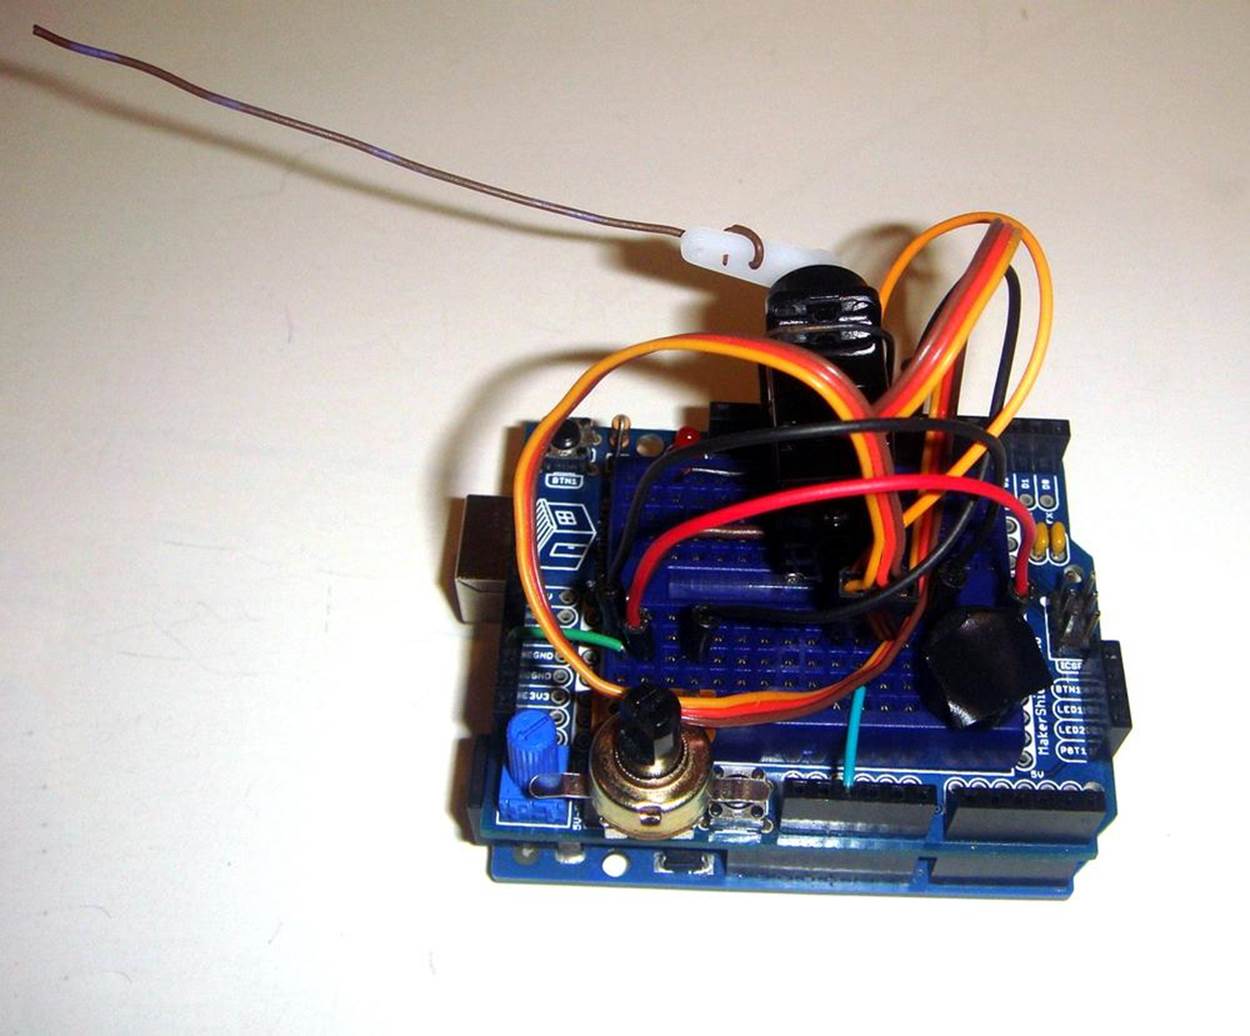 View of 10KΩ potentiometer (volume control) and piezo buzzer (with tape)